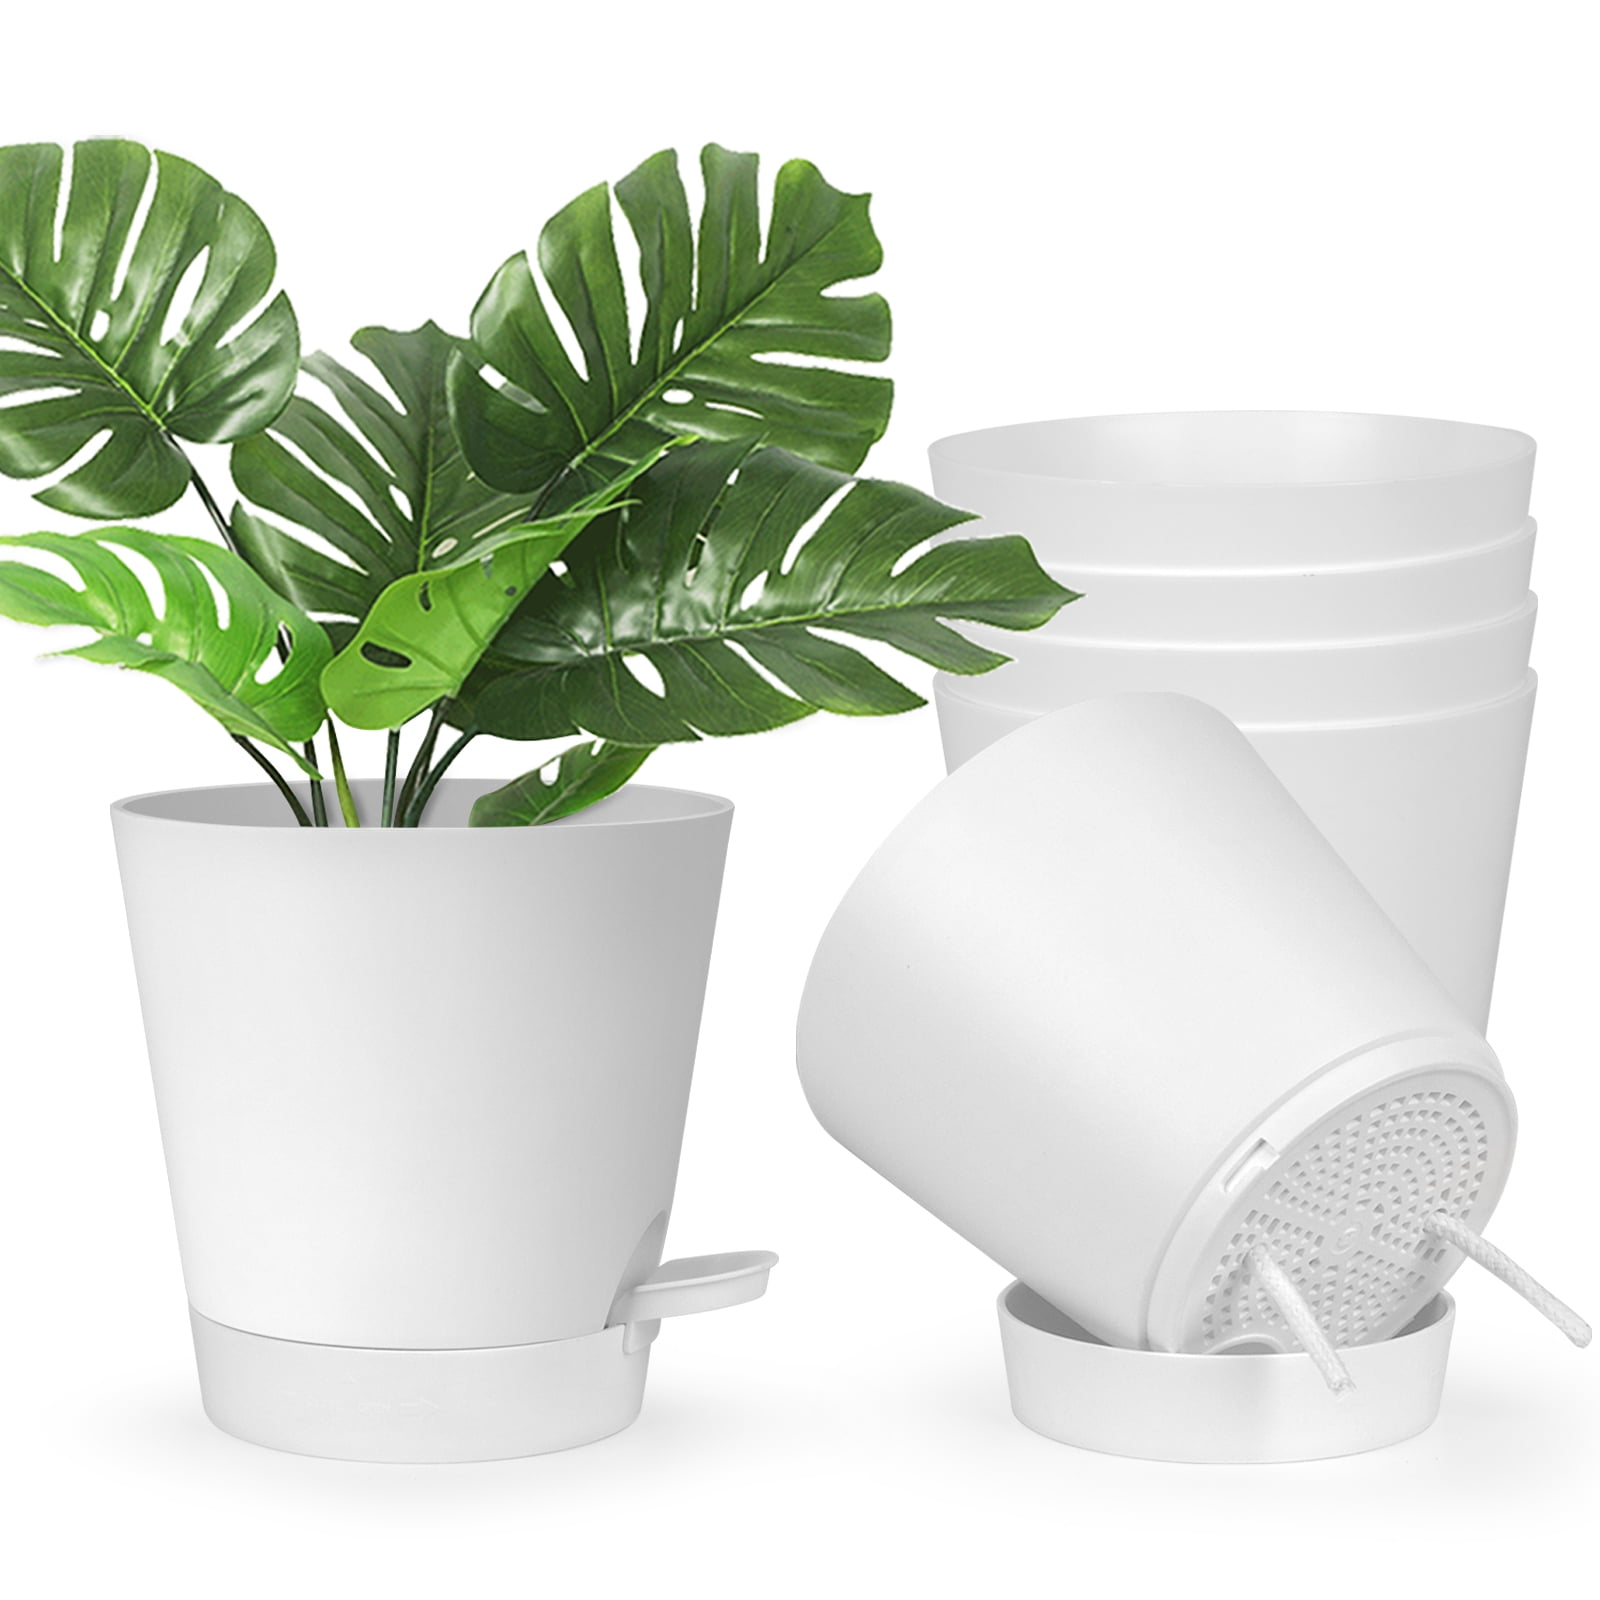 RIOGOO Self Watering Planters ,Plastic Planter with Removable High Drainage Deep,Modern Decorative Plant Pots for 6",White) Walmart.com